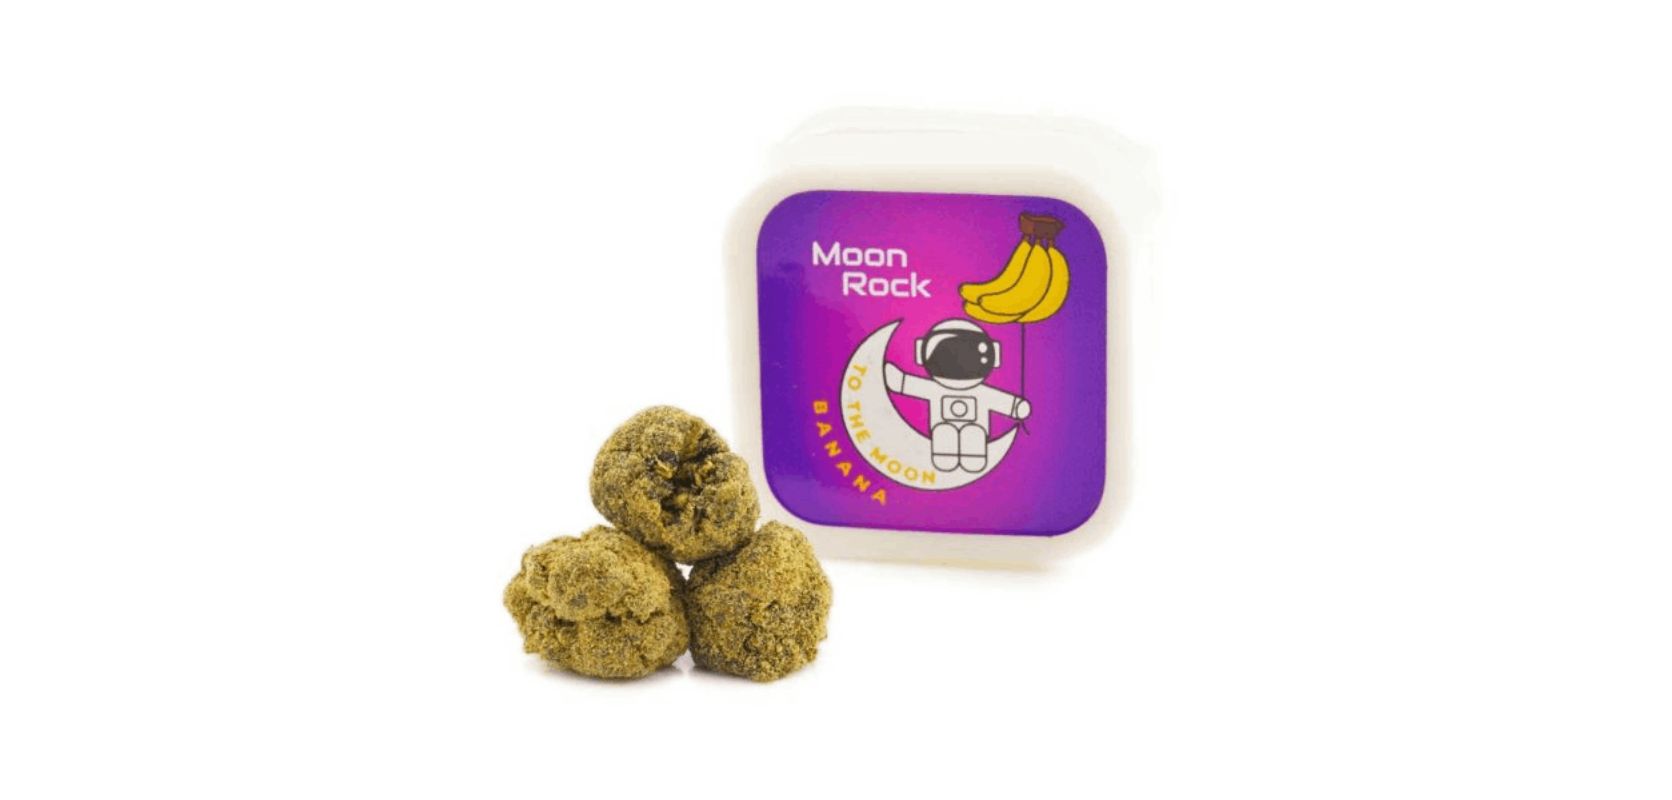 When it comes to evidence-backed options for stoners interested in the intersection of weed and exercise, To The Moon – Moon Rocks 1g is your best bet. 